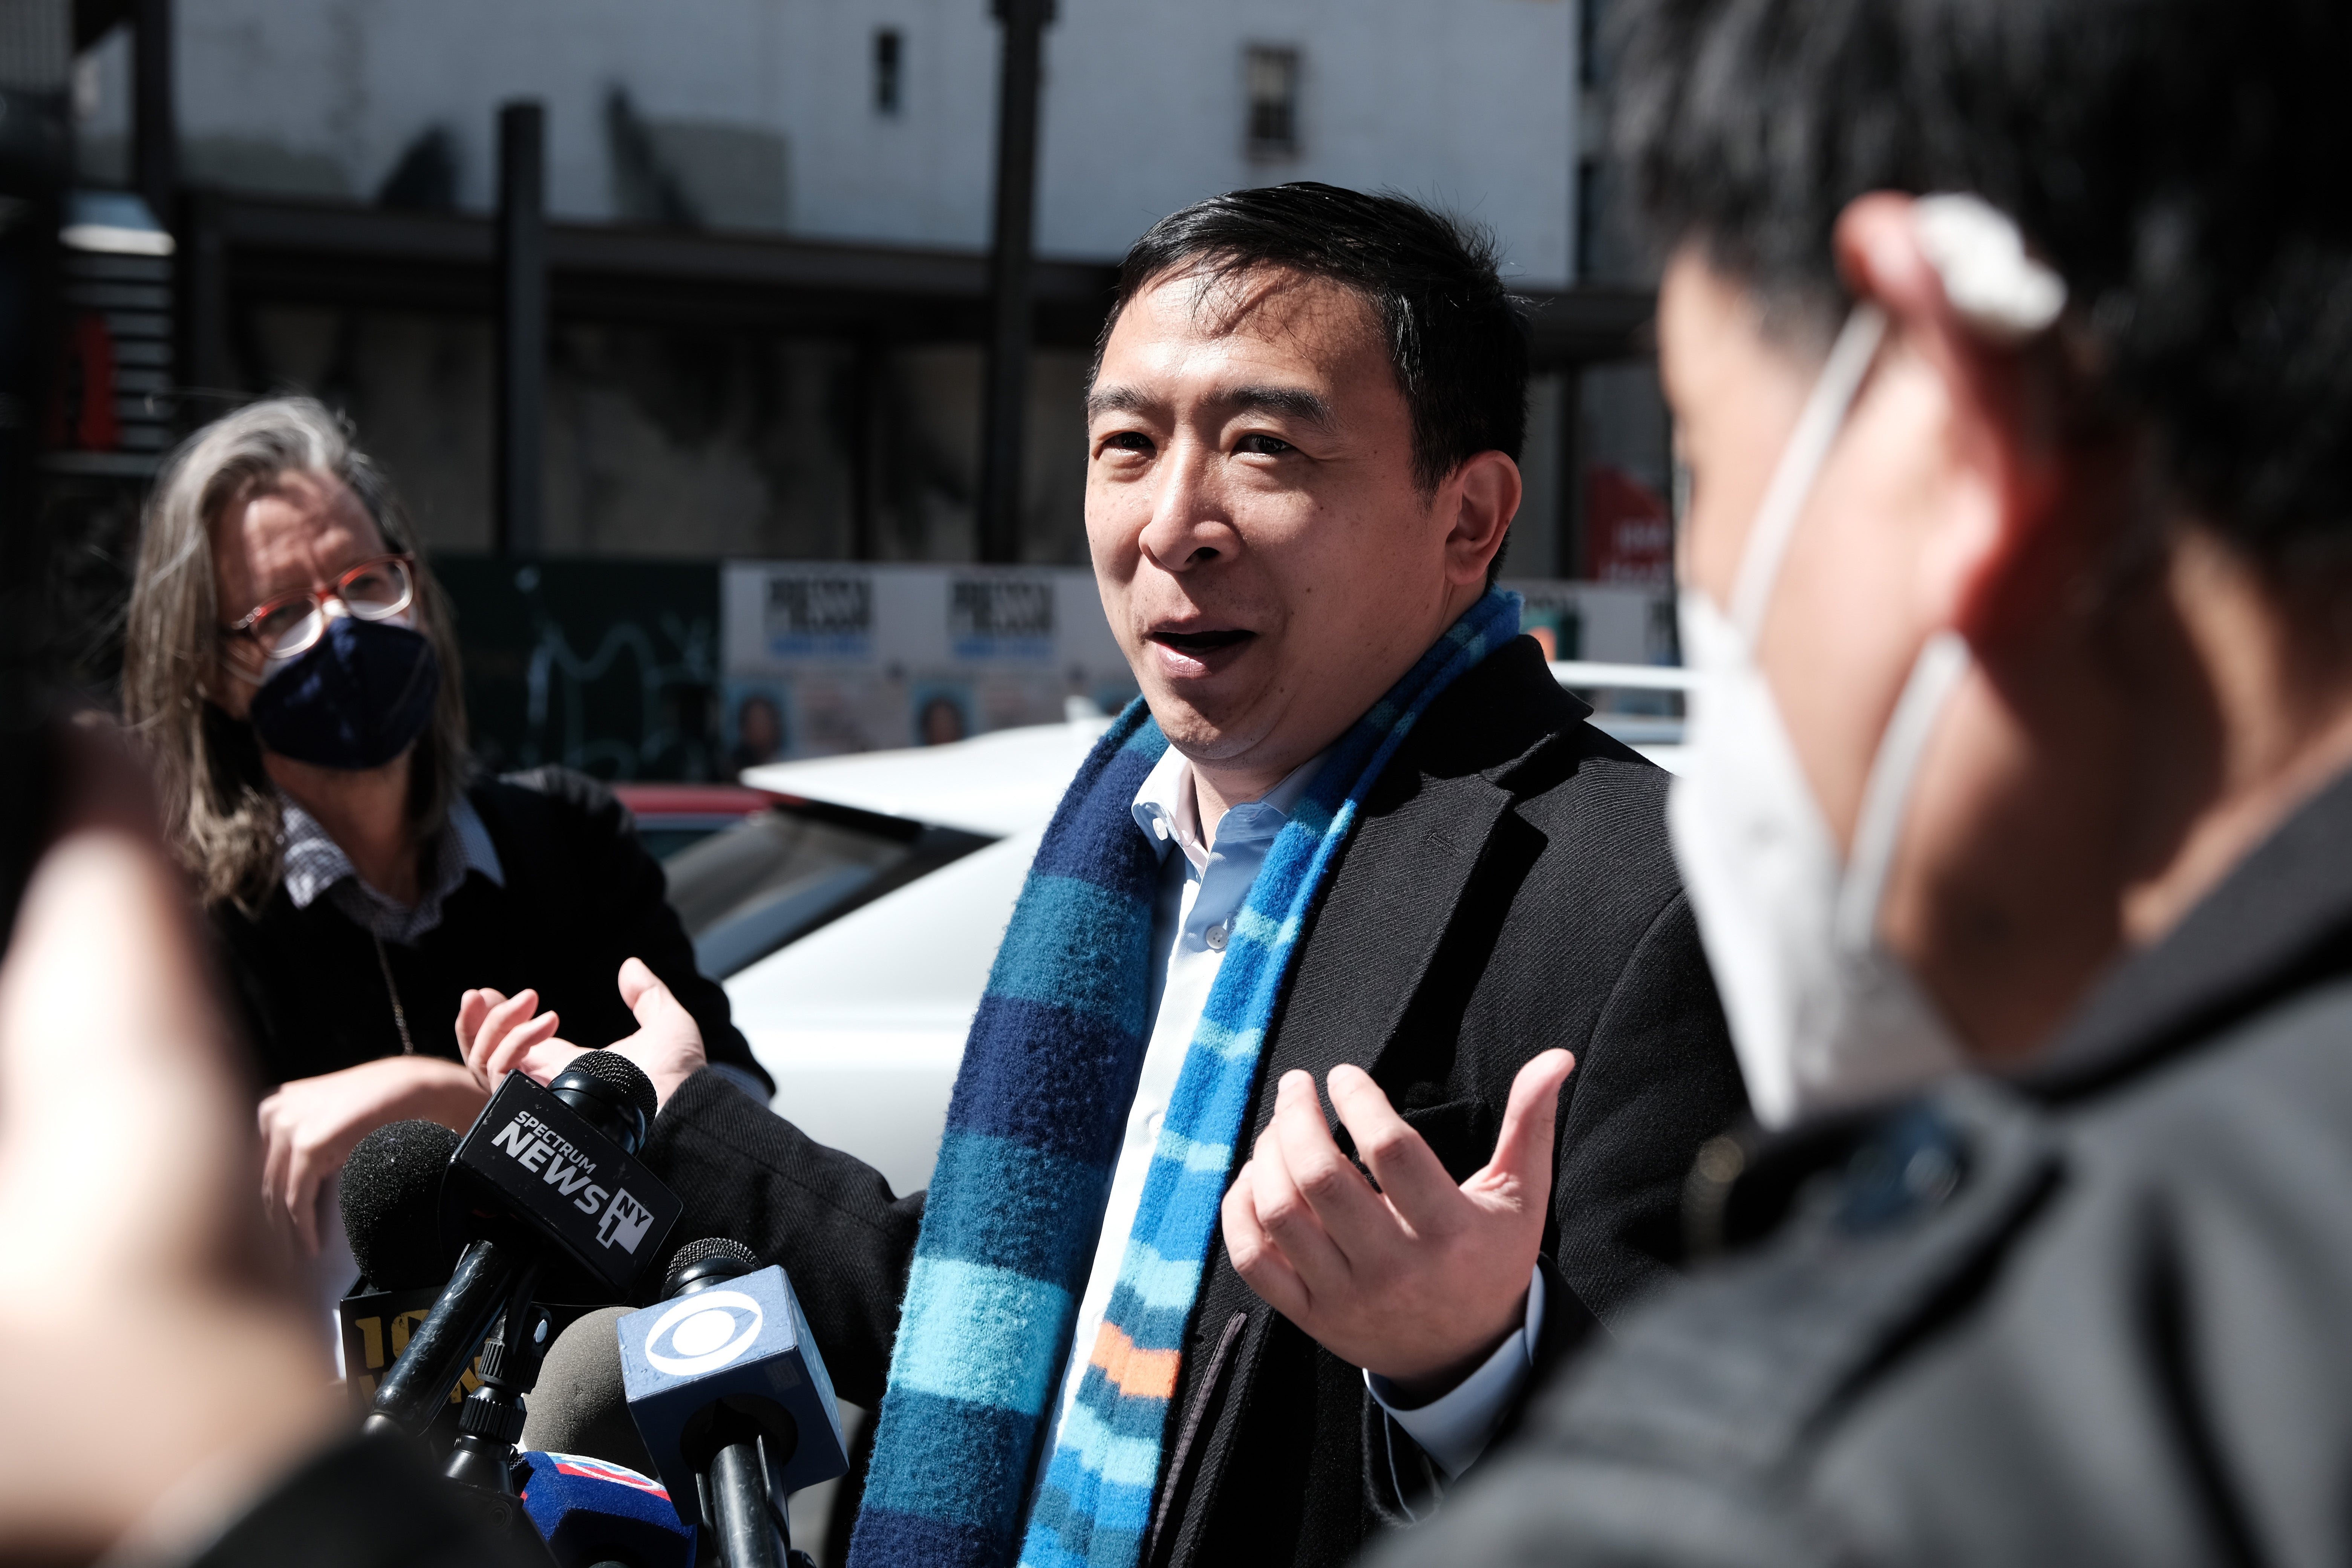 File Image: New York Mayoral Candidate Andrew Yang speaks to members of the media along Canal Street in Chinatown on 5 April 2021 in New York City